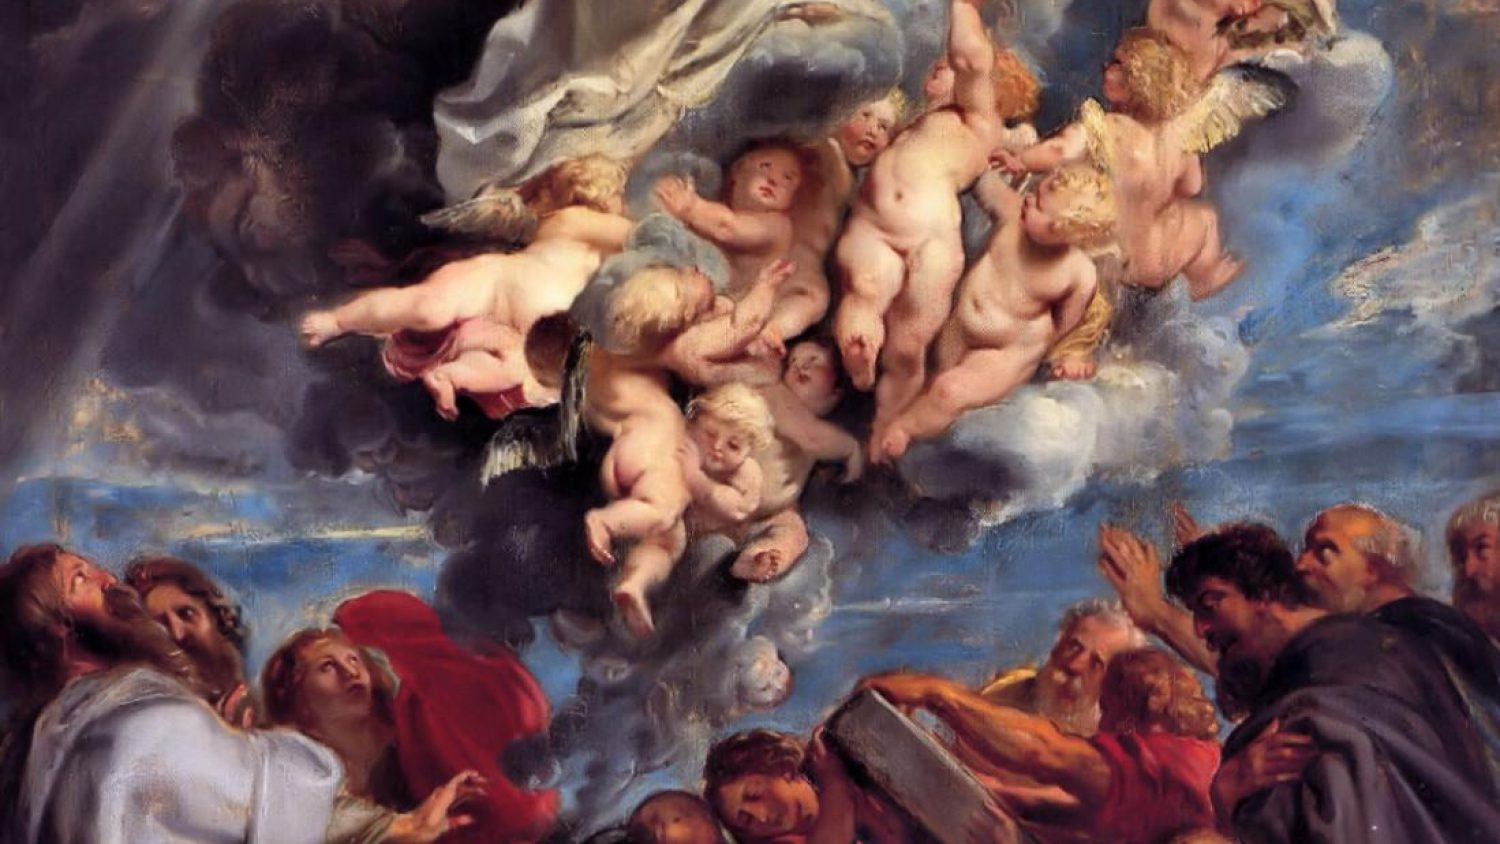 rubens_assumption_of_the_devine_and_holy_virgin_mary